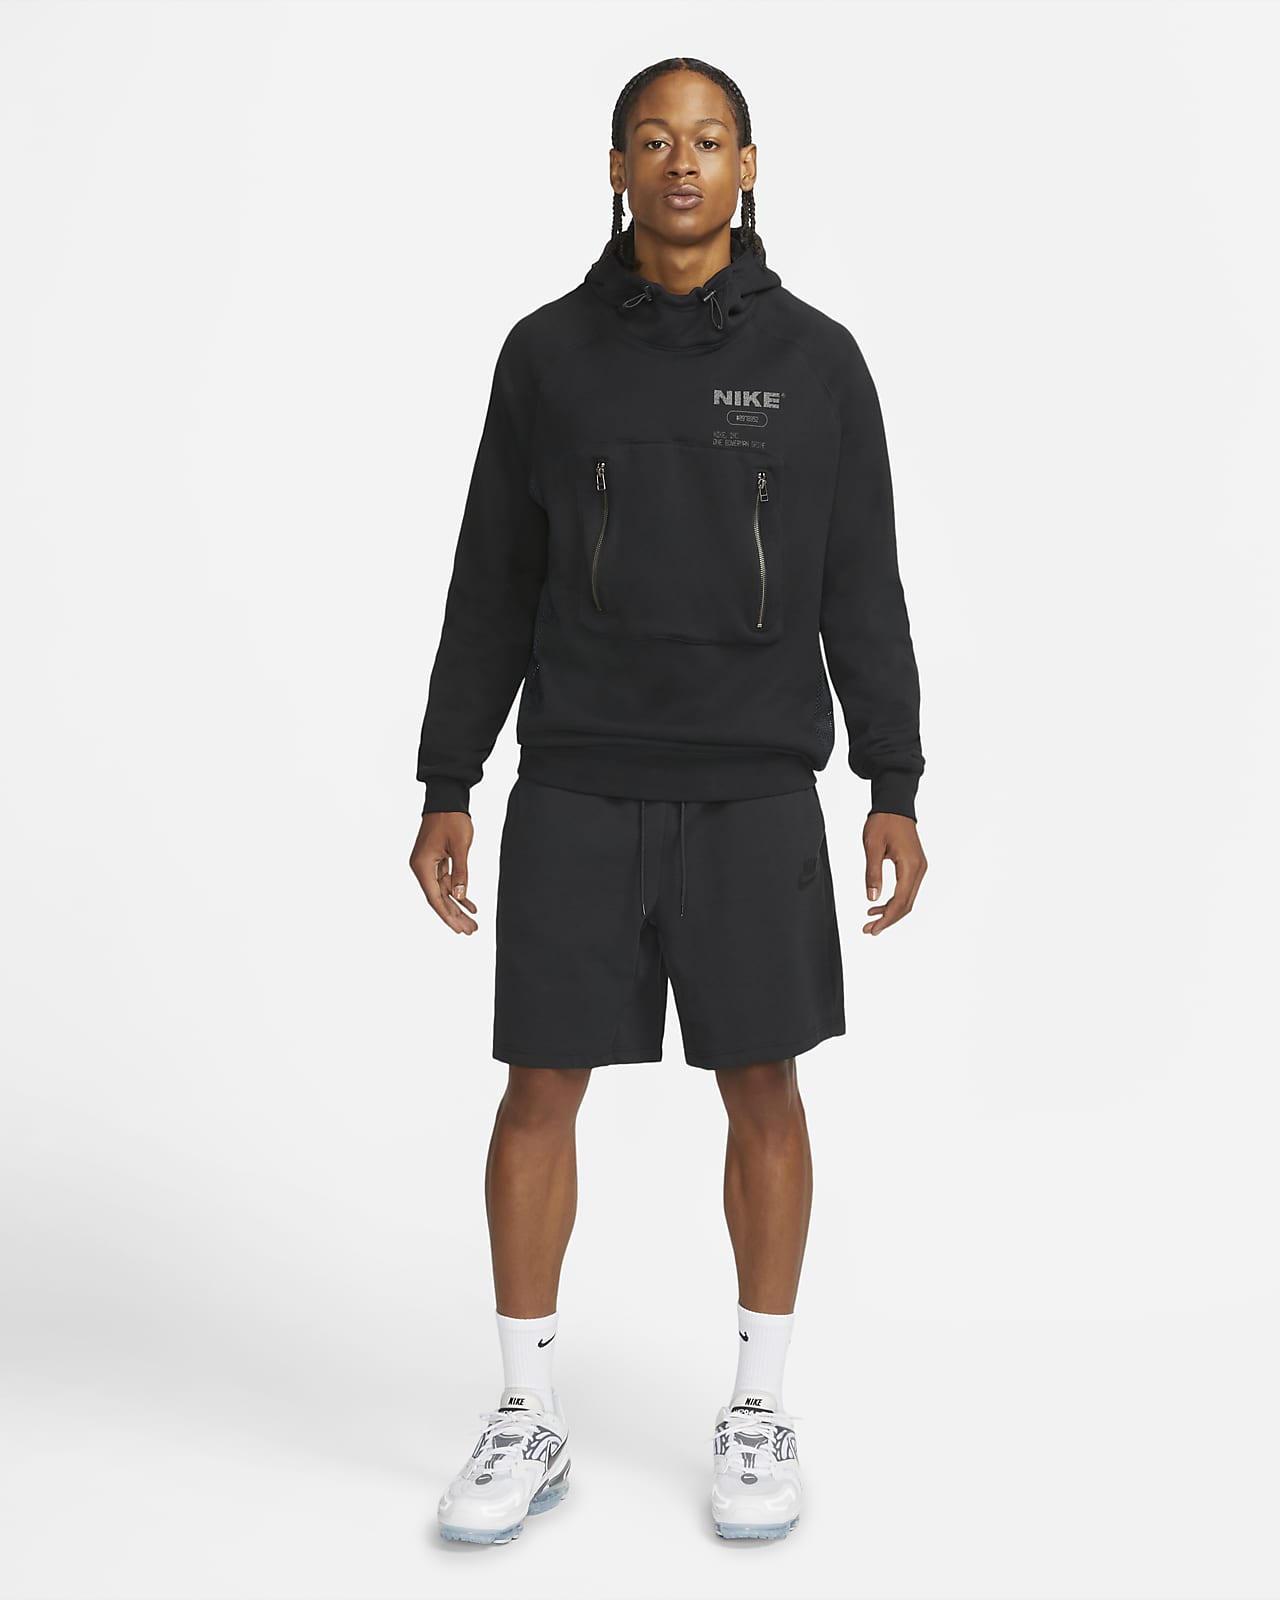 Nike Sportswear City Made Men's French Terry Pullover. Nike ZA